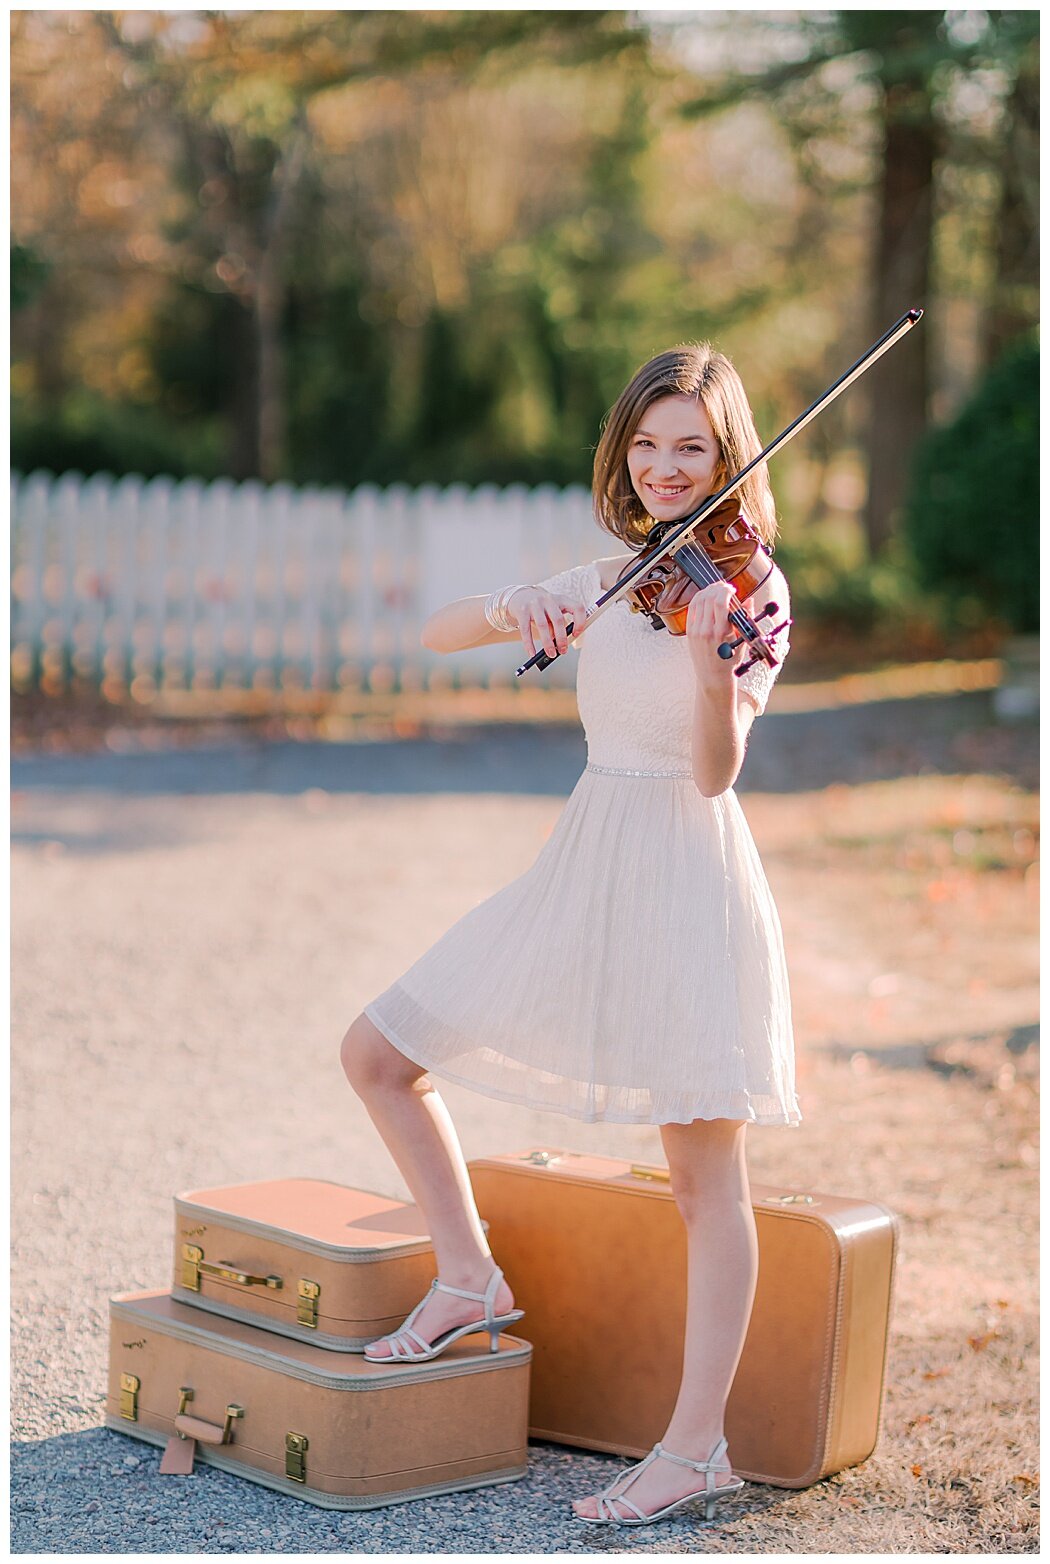 Senior Portraits with Violin and Vintage Luggage